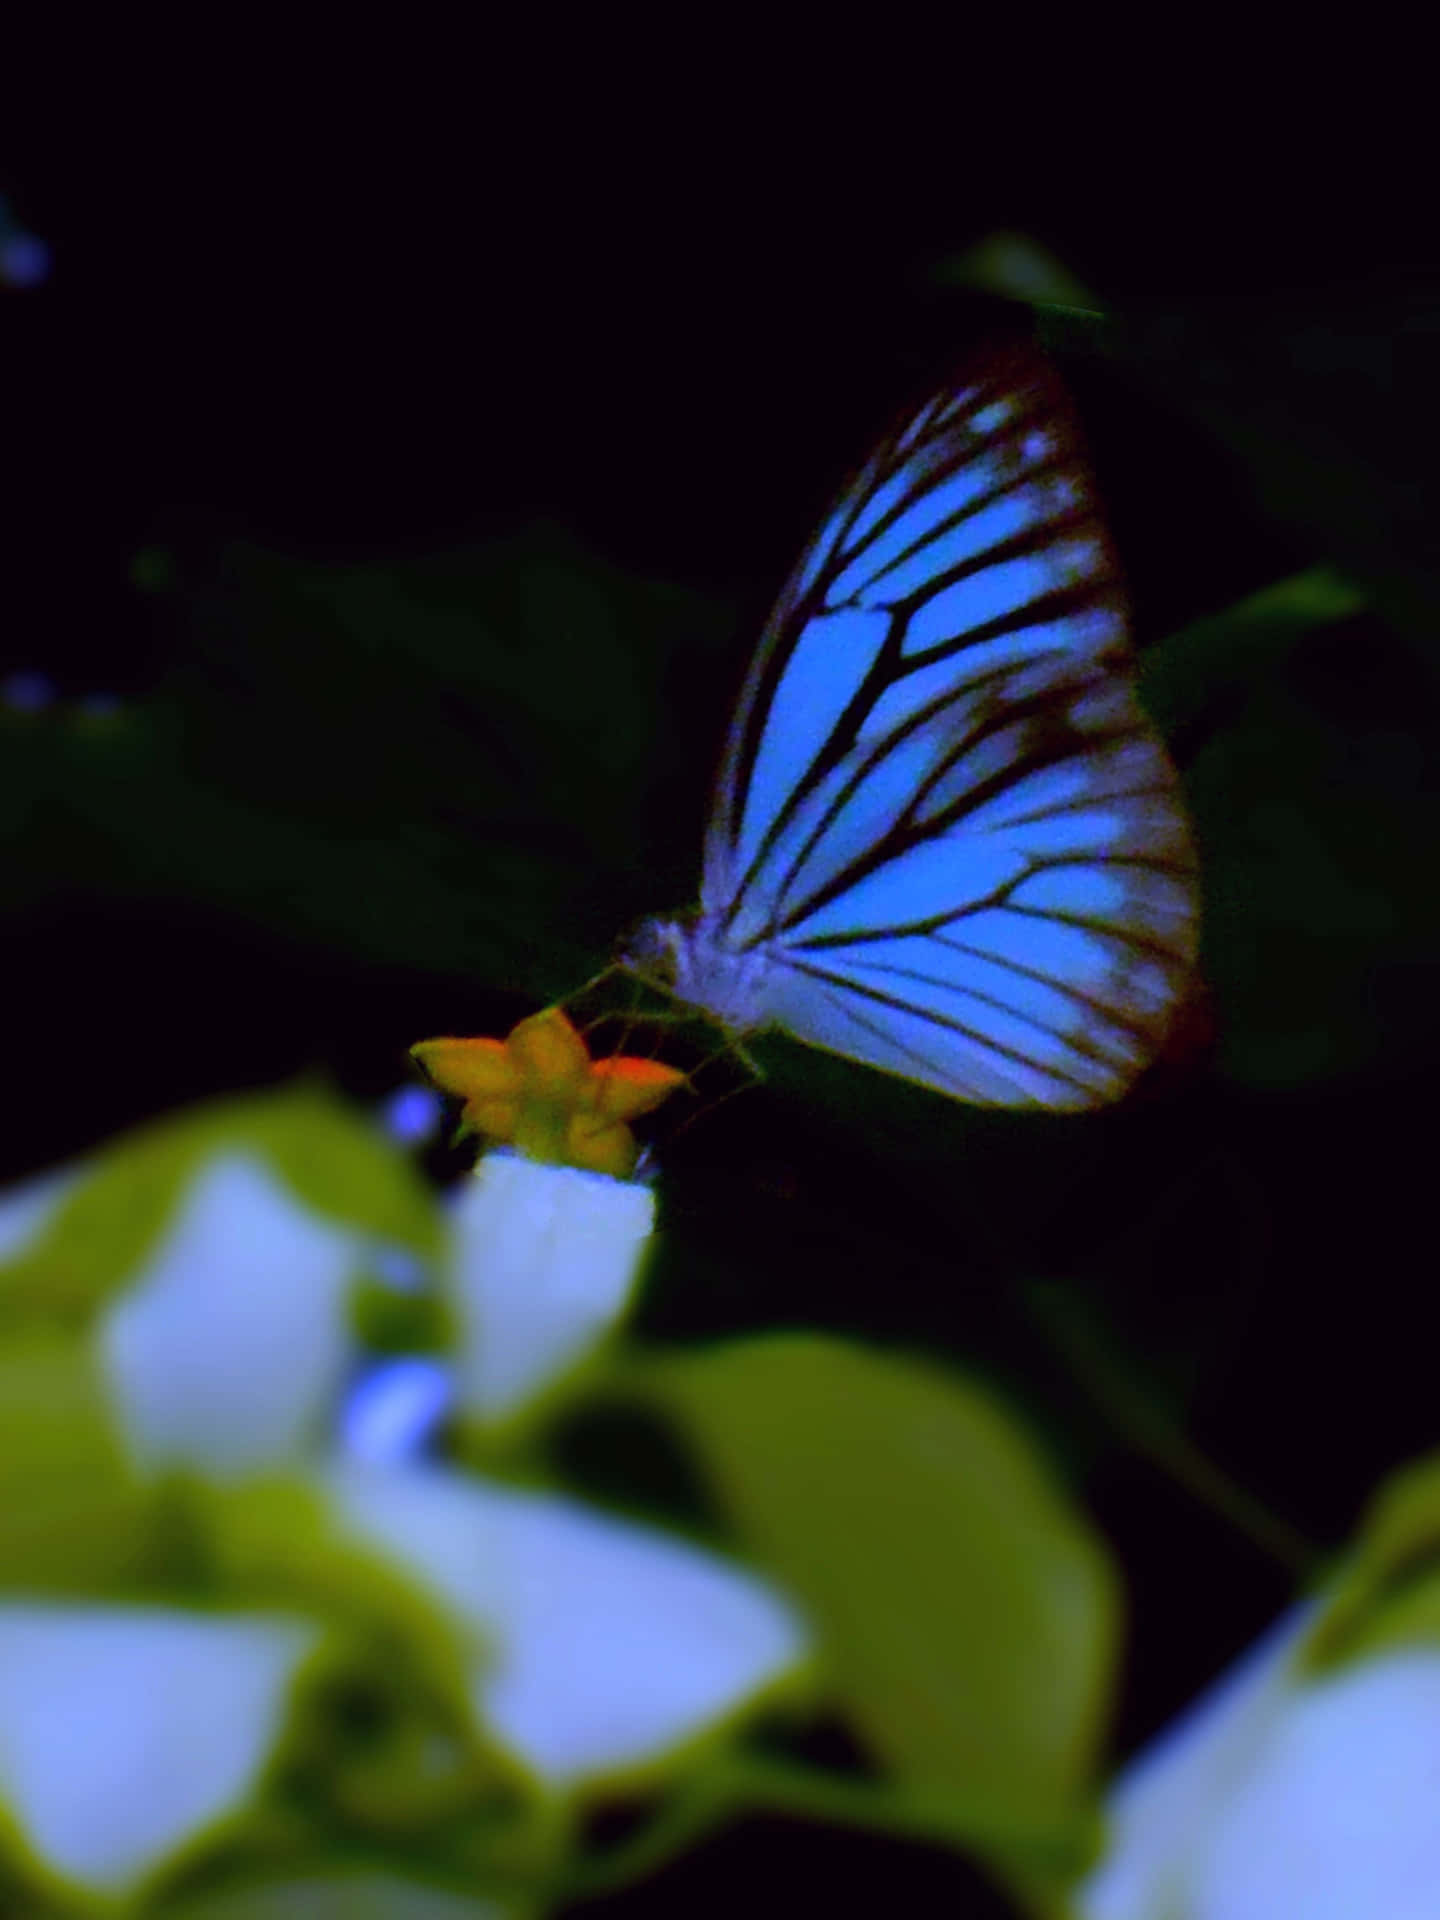 "The Magic of a Real Butterfly"